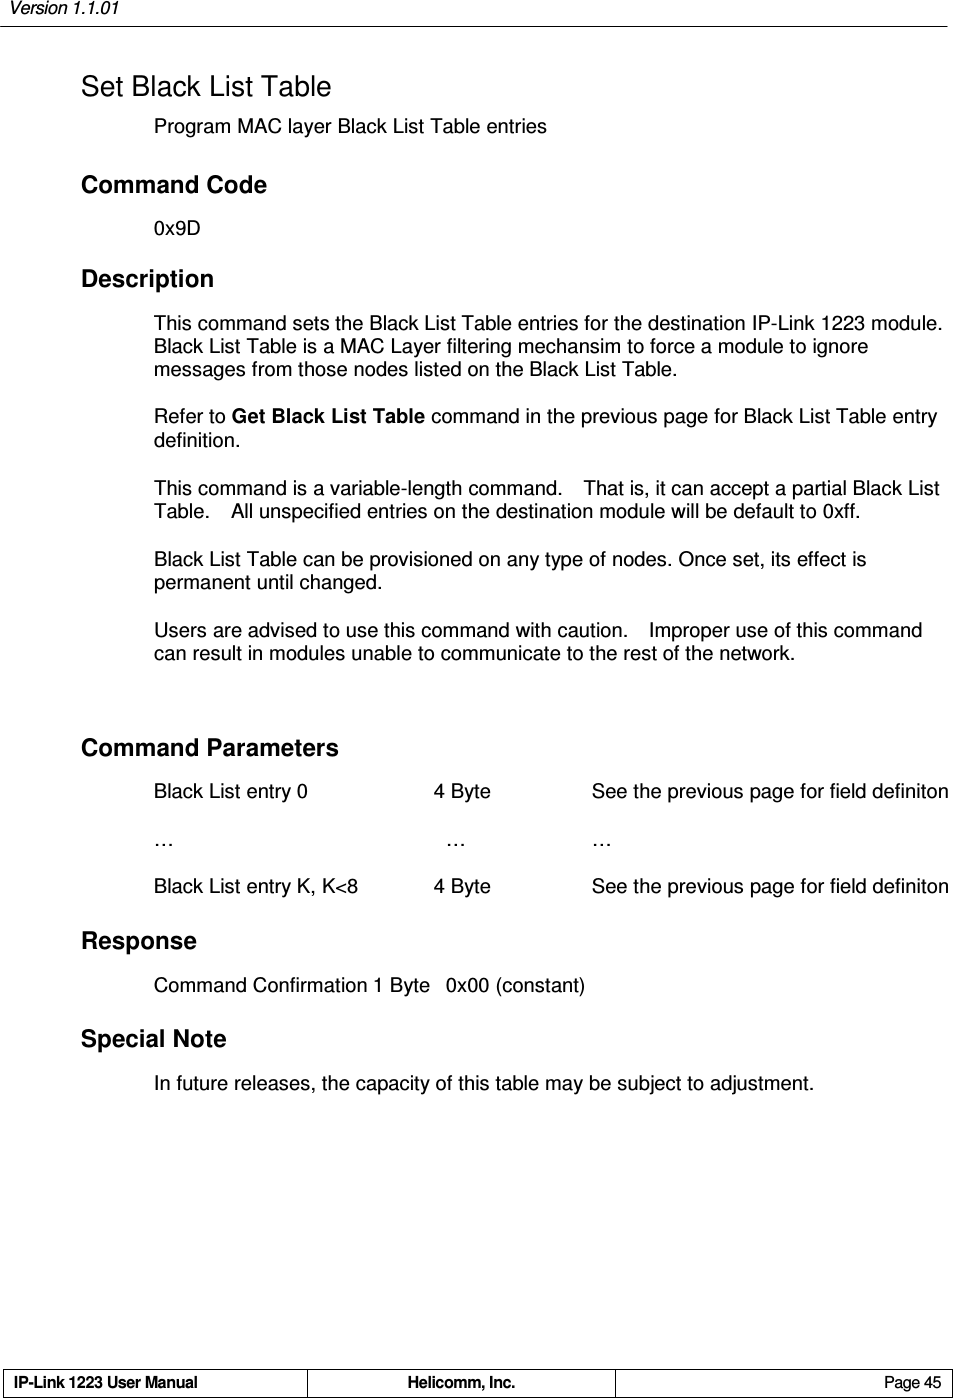 Version 1.1.01     IP-Link 1223 User Manual  Helicomm, Inc.  Page 45   Set Black List Table Program MAC layer Black List Table entries Command Code 0x9D Description This command sets the Black List Table entries for the destination IP-Link 1223 module.   Black List Table is a MAC Layer filtering mechansim to force a module to ignore messages from those nodes listed on the Black List Table. Refer to Get Black List Table command in the previous page for Black List Table entry definition. This command is a variable-length command.    That is, it can accept a partial Black List Table.    All unspecified entries on the destination module will be default to 0xff. Black List Table can be provisioned on any type of nodes. Once set, its effect is permanent until changed. Users are advised to use this command with caution.    Improper use of this command can result in modules unable to communicate to the rest of the network.  Command Parameters Black List entry 0              4 Byte        See the previous page for field definiton …                                          …              … Black List entry K, K&lt;8              4 Byte        See the previous page for field definiton Response Command Confirmation 1 Byte  0x00 (constant) Special Note In future releases, the capacity of this table may be subject to adjustment. 